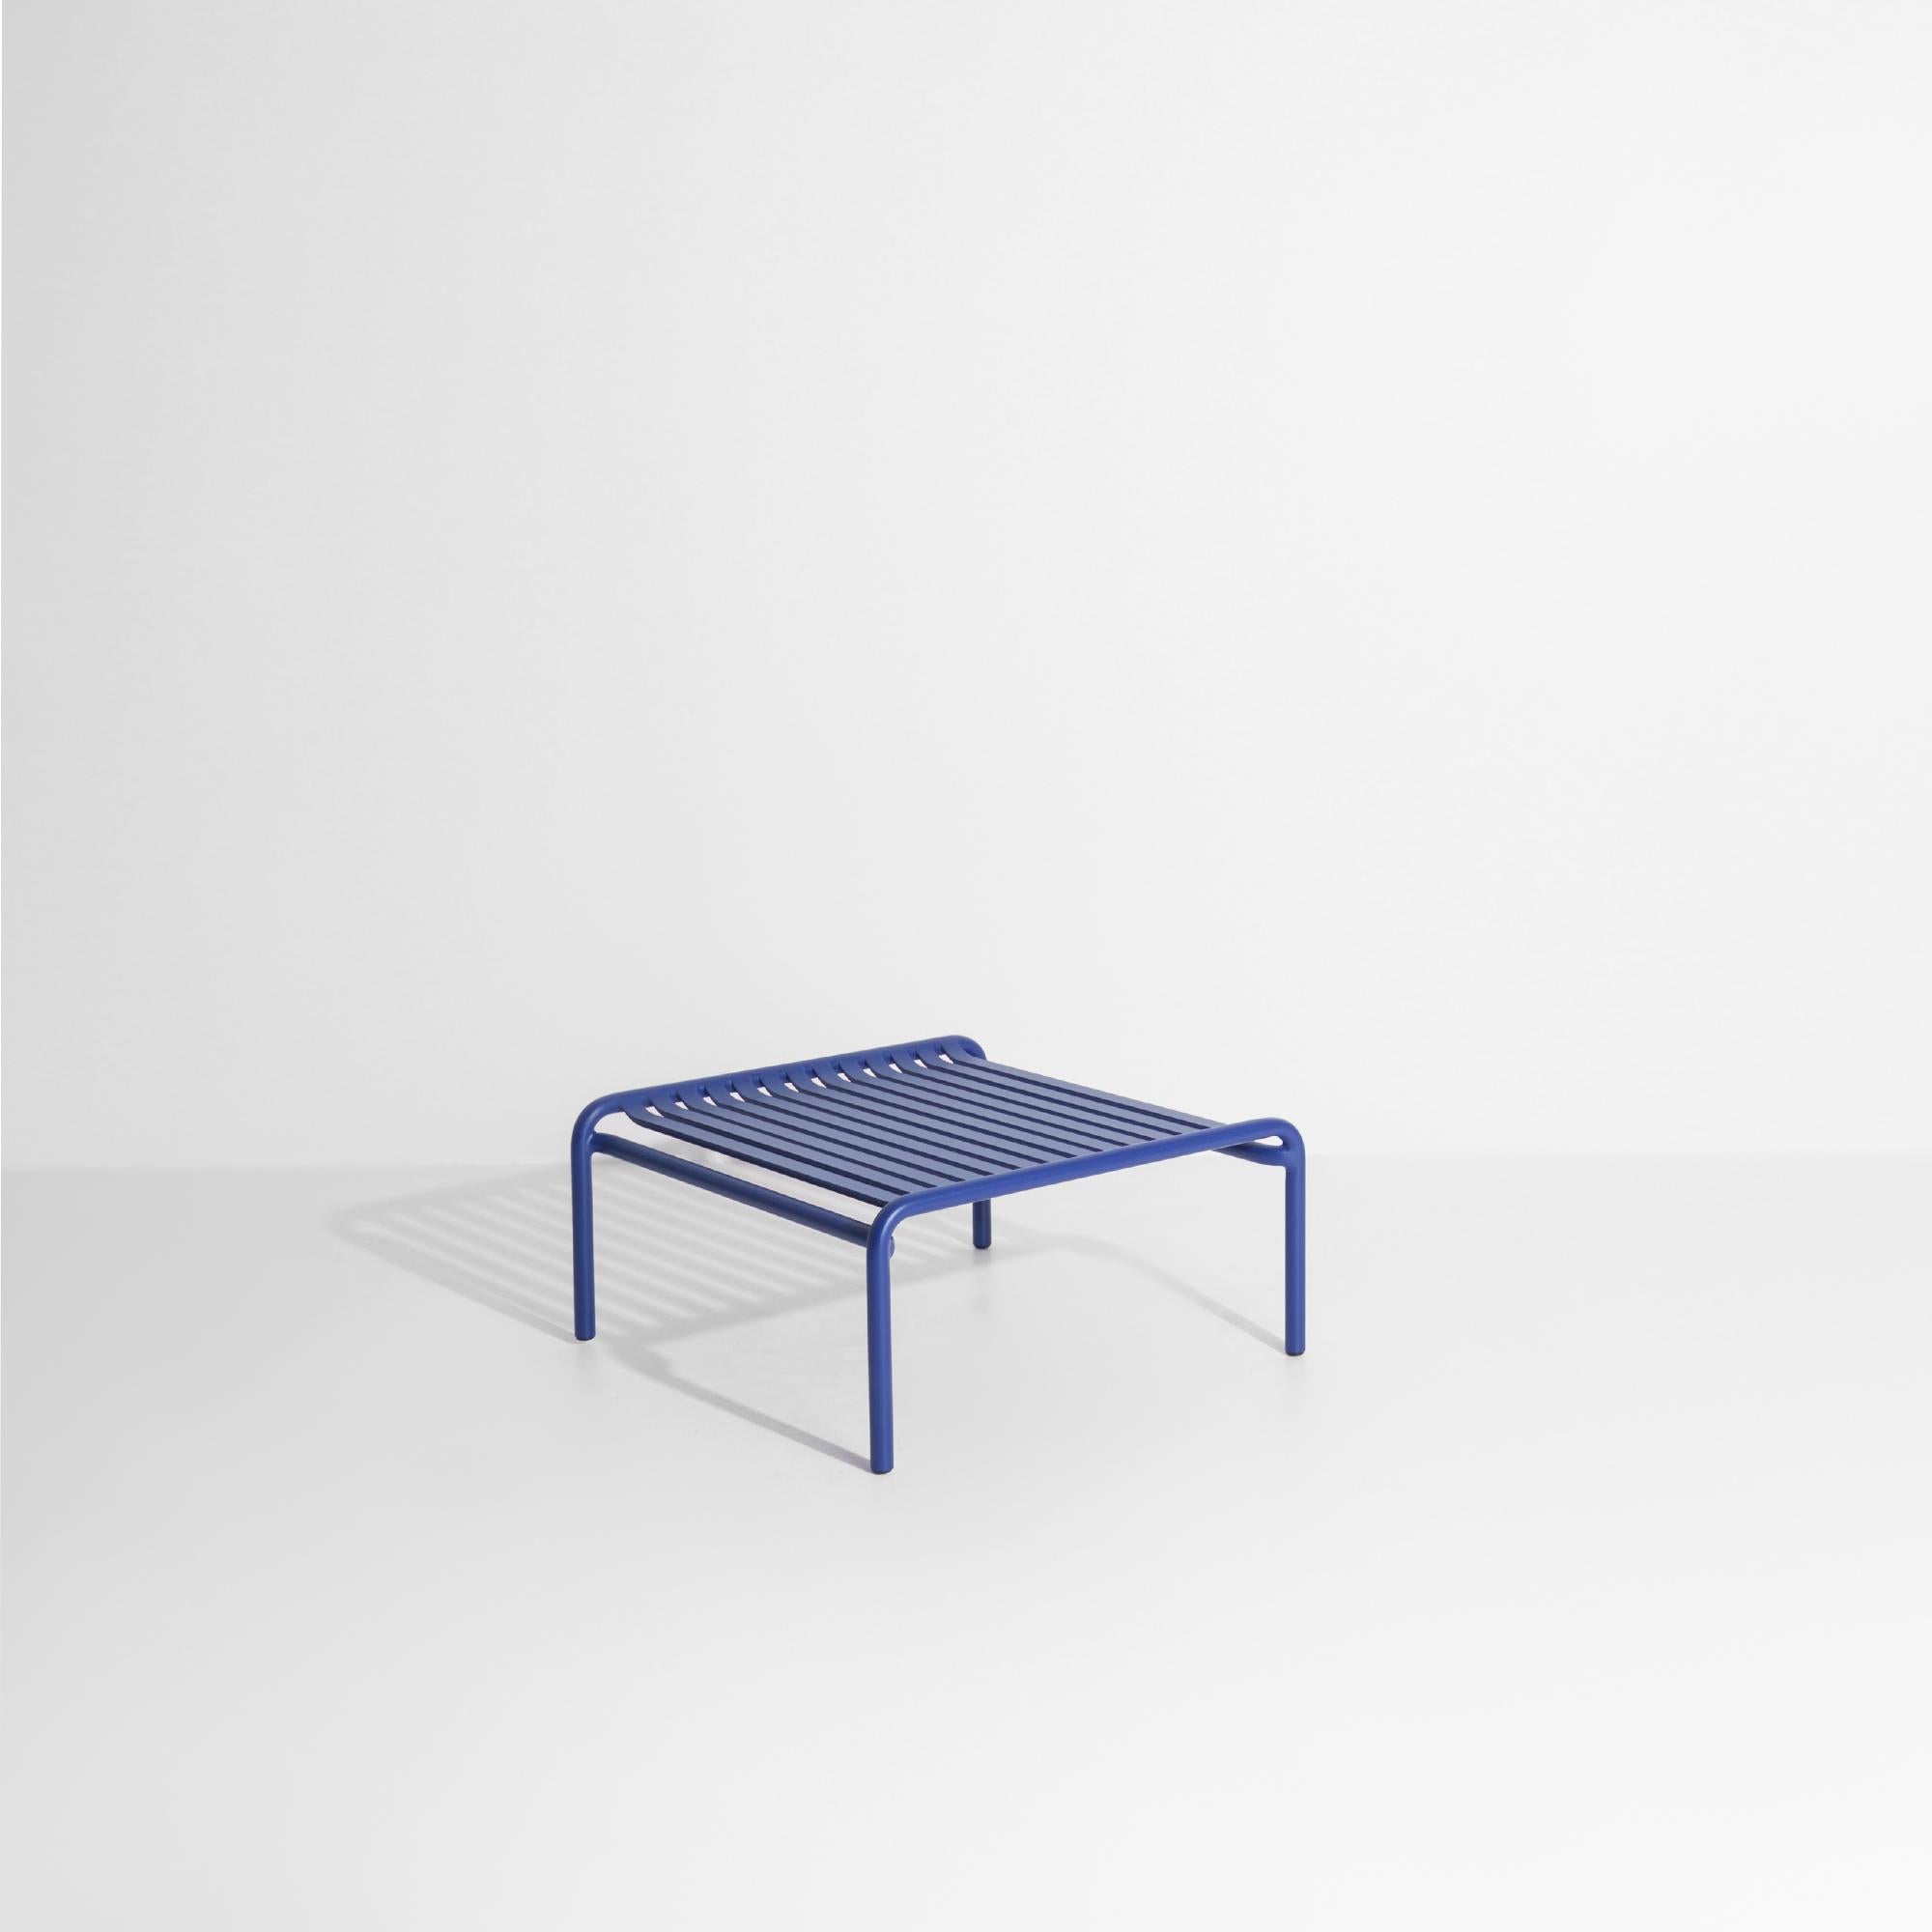 Petite Friture Week-End Coffee Table in Blue Aluminium by Studio BrichetZiegler In New Condition For Sale In Brooklyn, NY